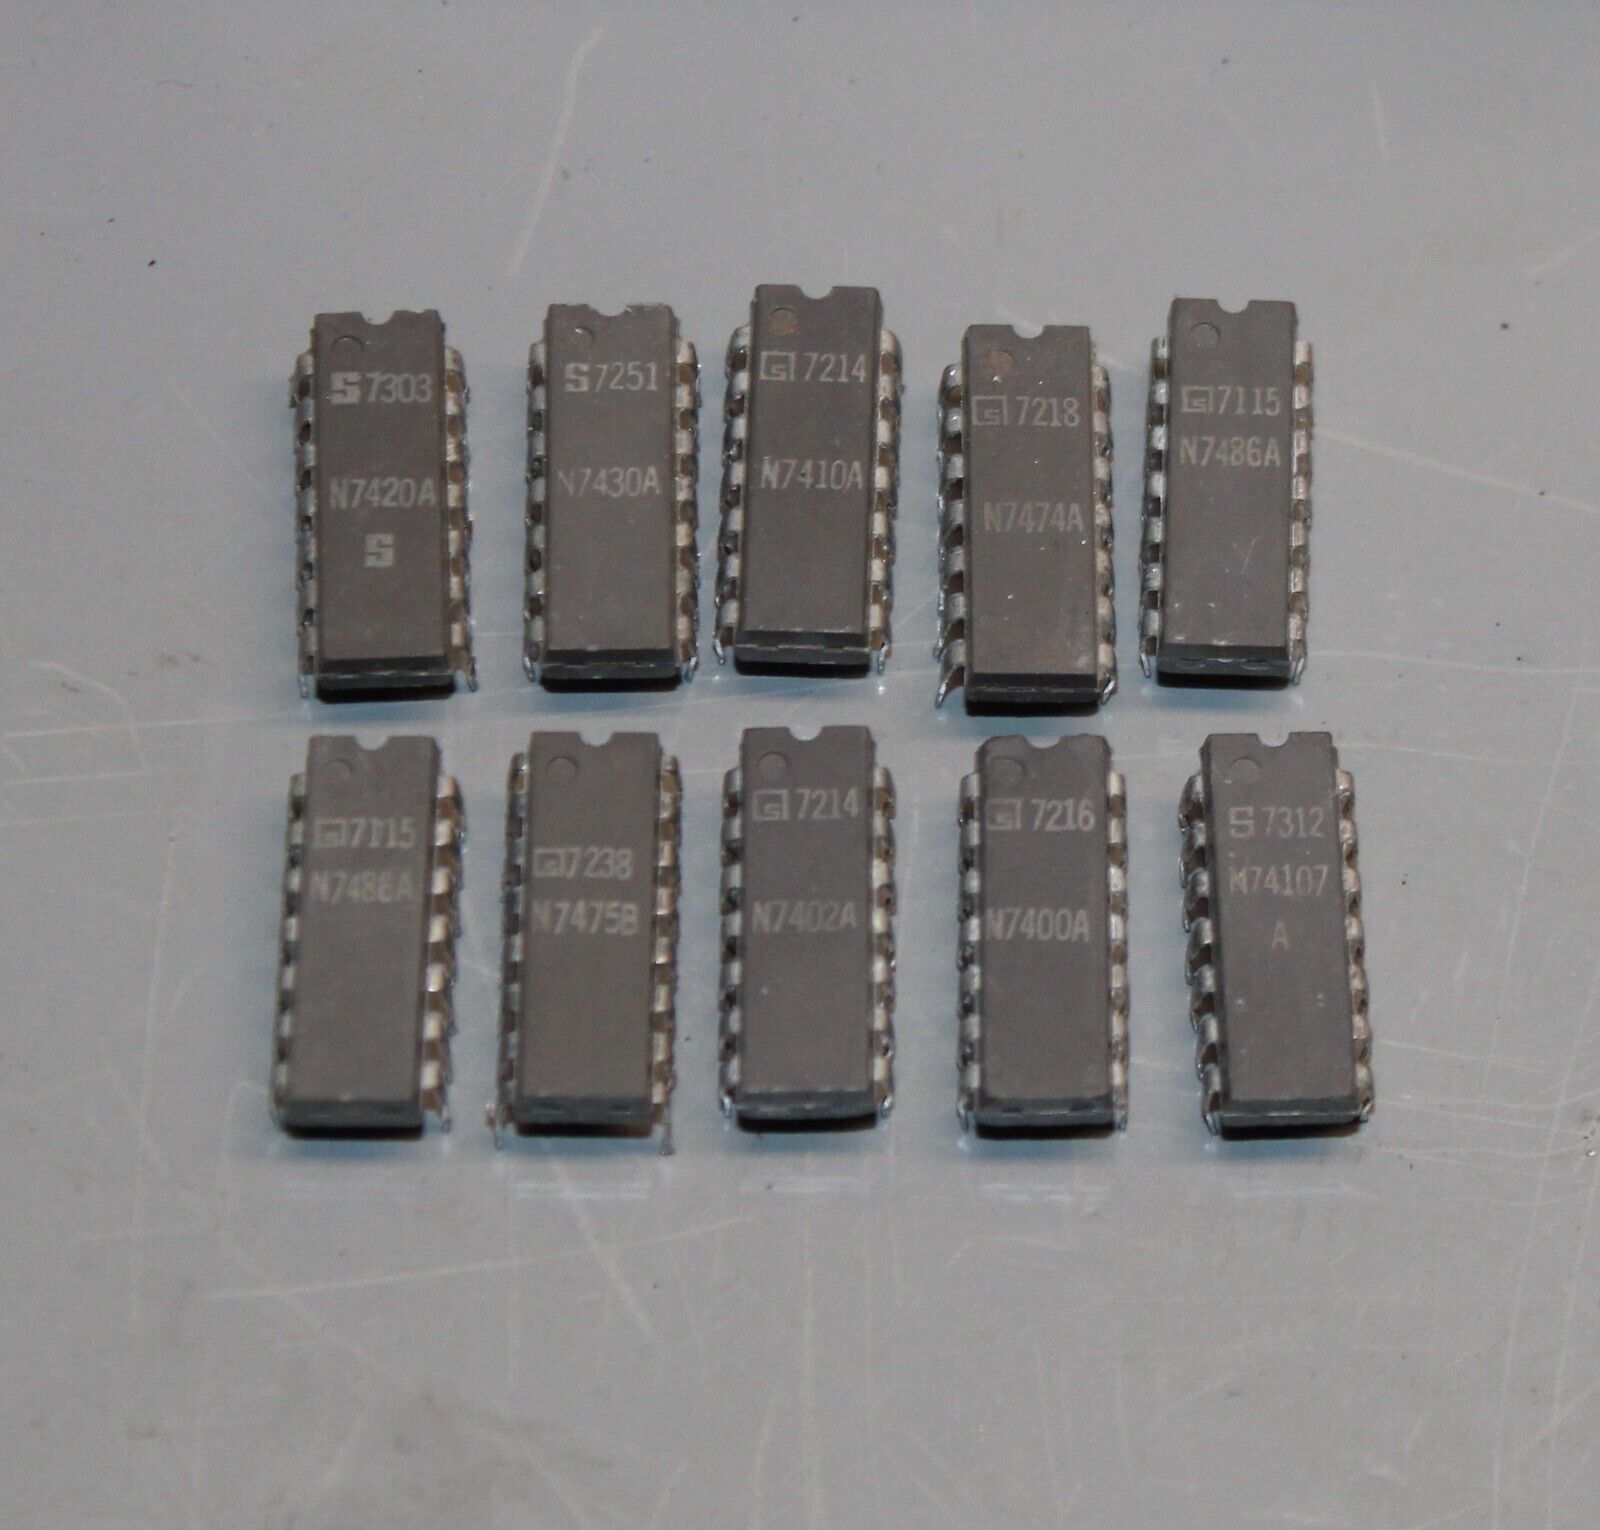 10x Vintage TTL Chips from the first coin-op Video Game - Nutting Computer Space